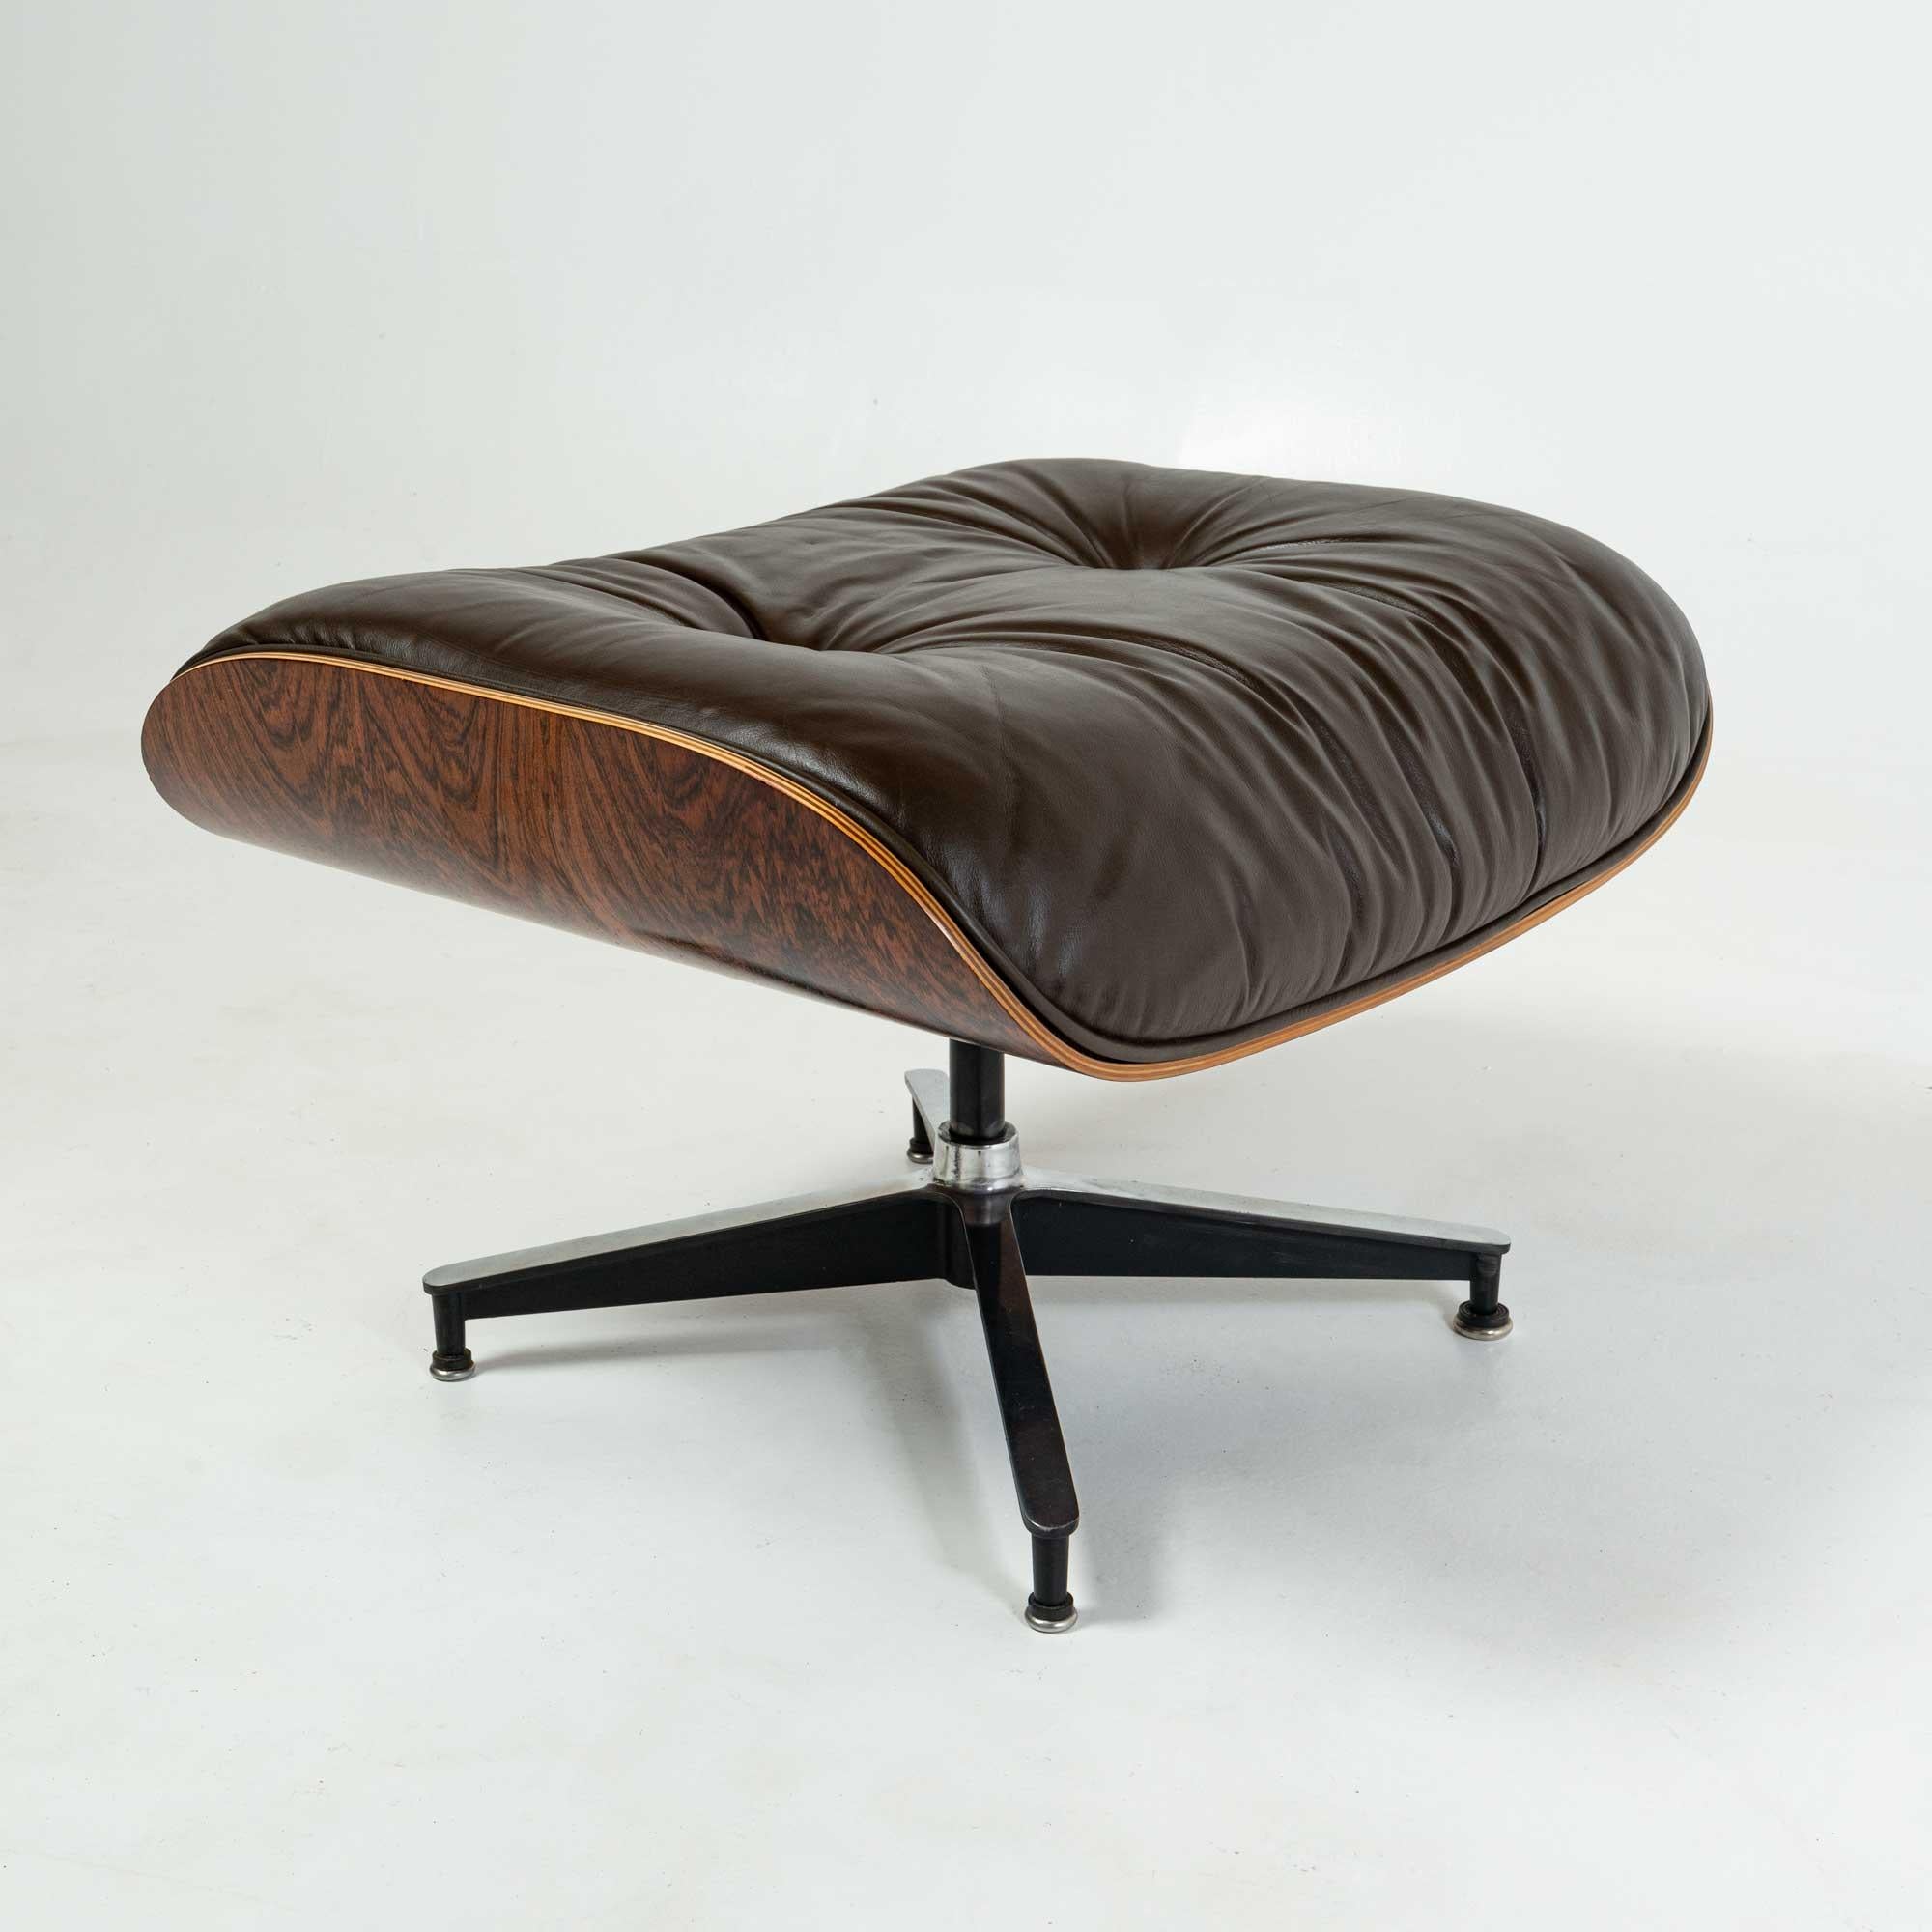 3rd Gen Eames Lounge Chair 670-671 in Original Chocolate Leather For Sale 7